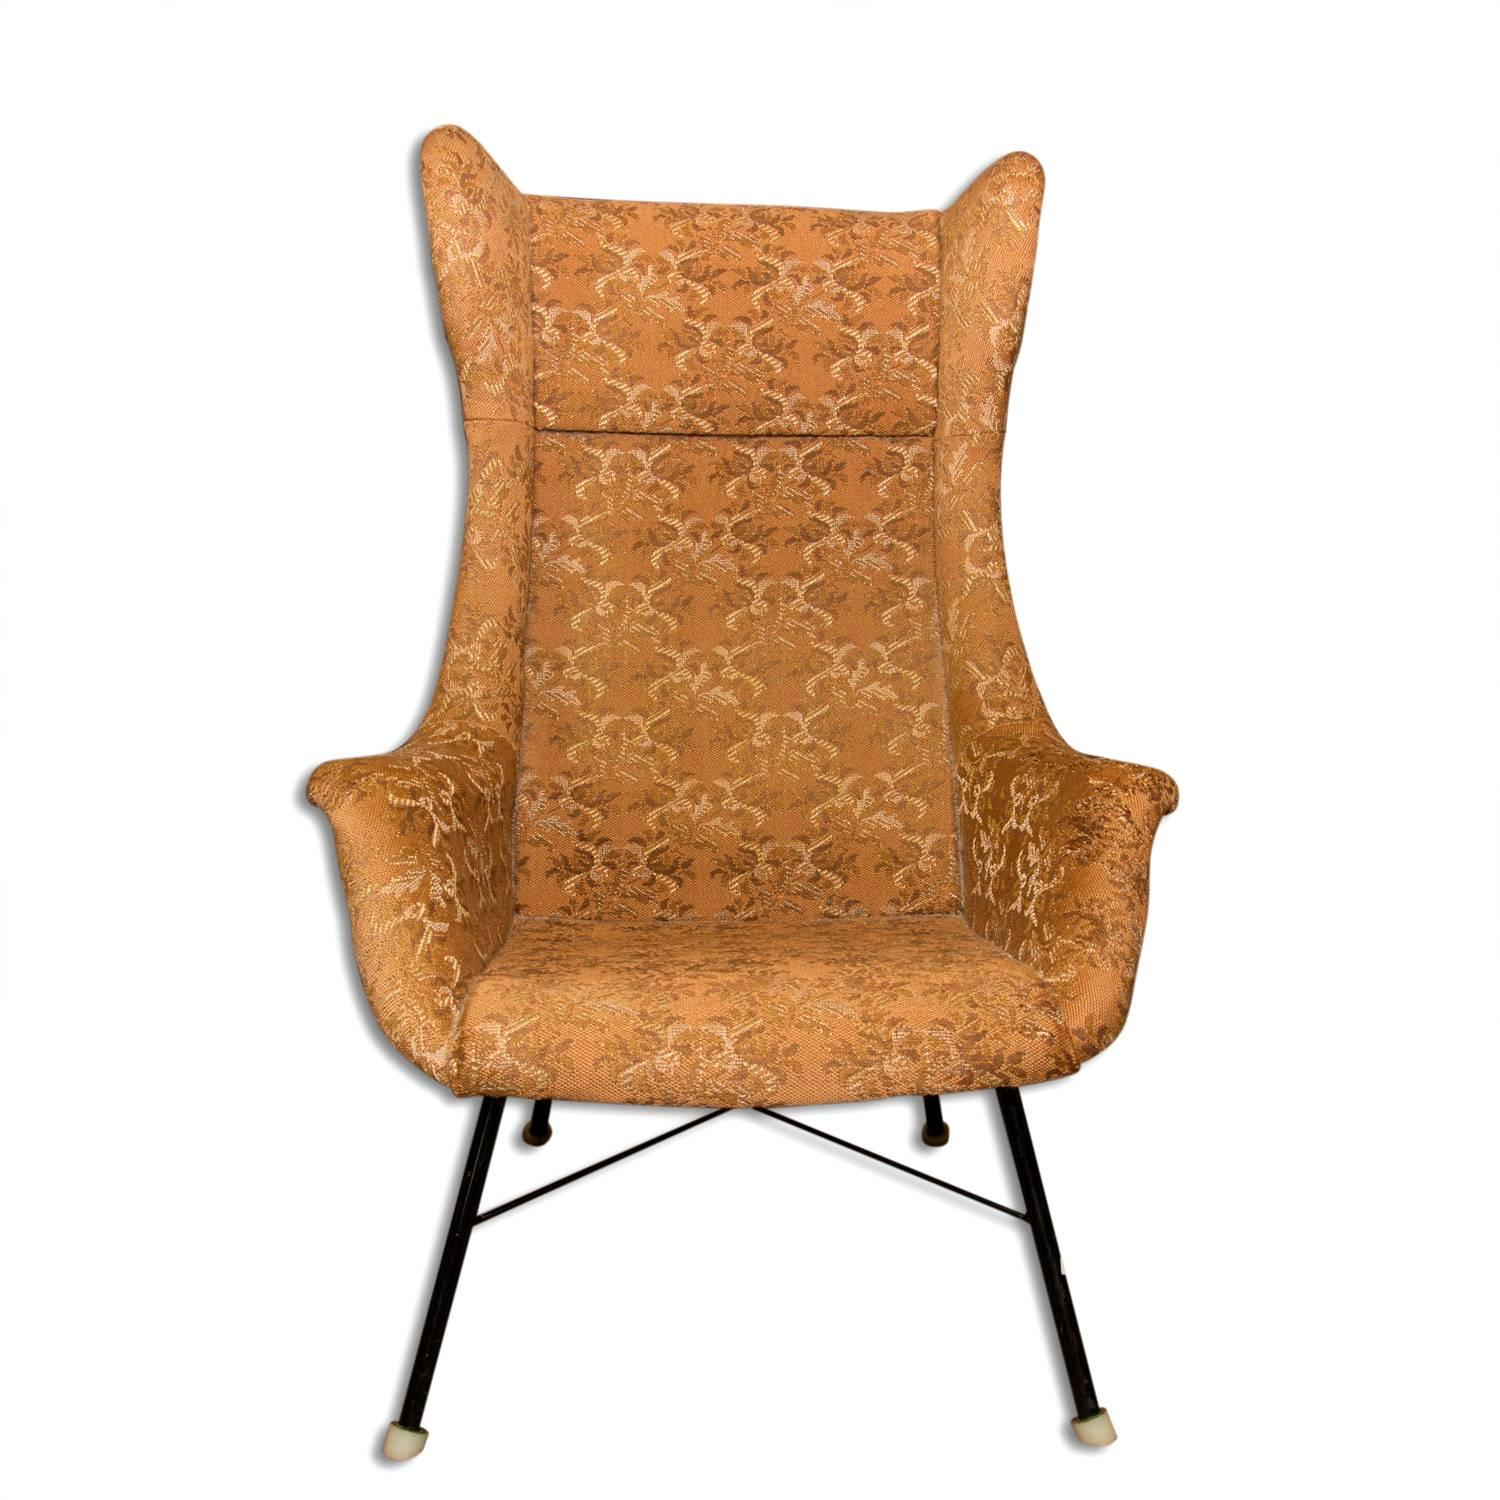 A popular and well-known wingback chair attributed to the Czech designer Miroslav Navrátil. This chair was designed in the context of the world-renowned exhibition EXPO in Brussels in 1958, where the Czechoslovak pavillon was a phenomenal